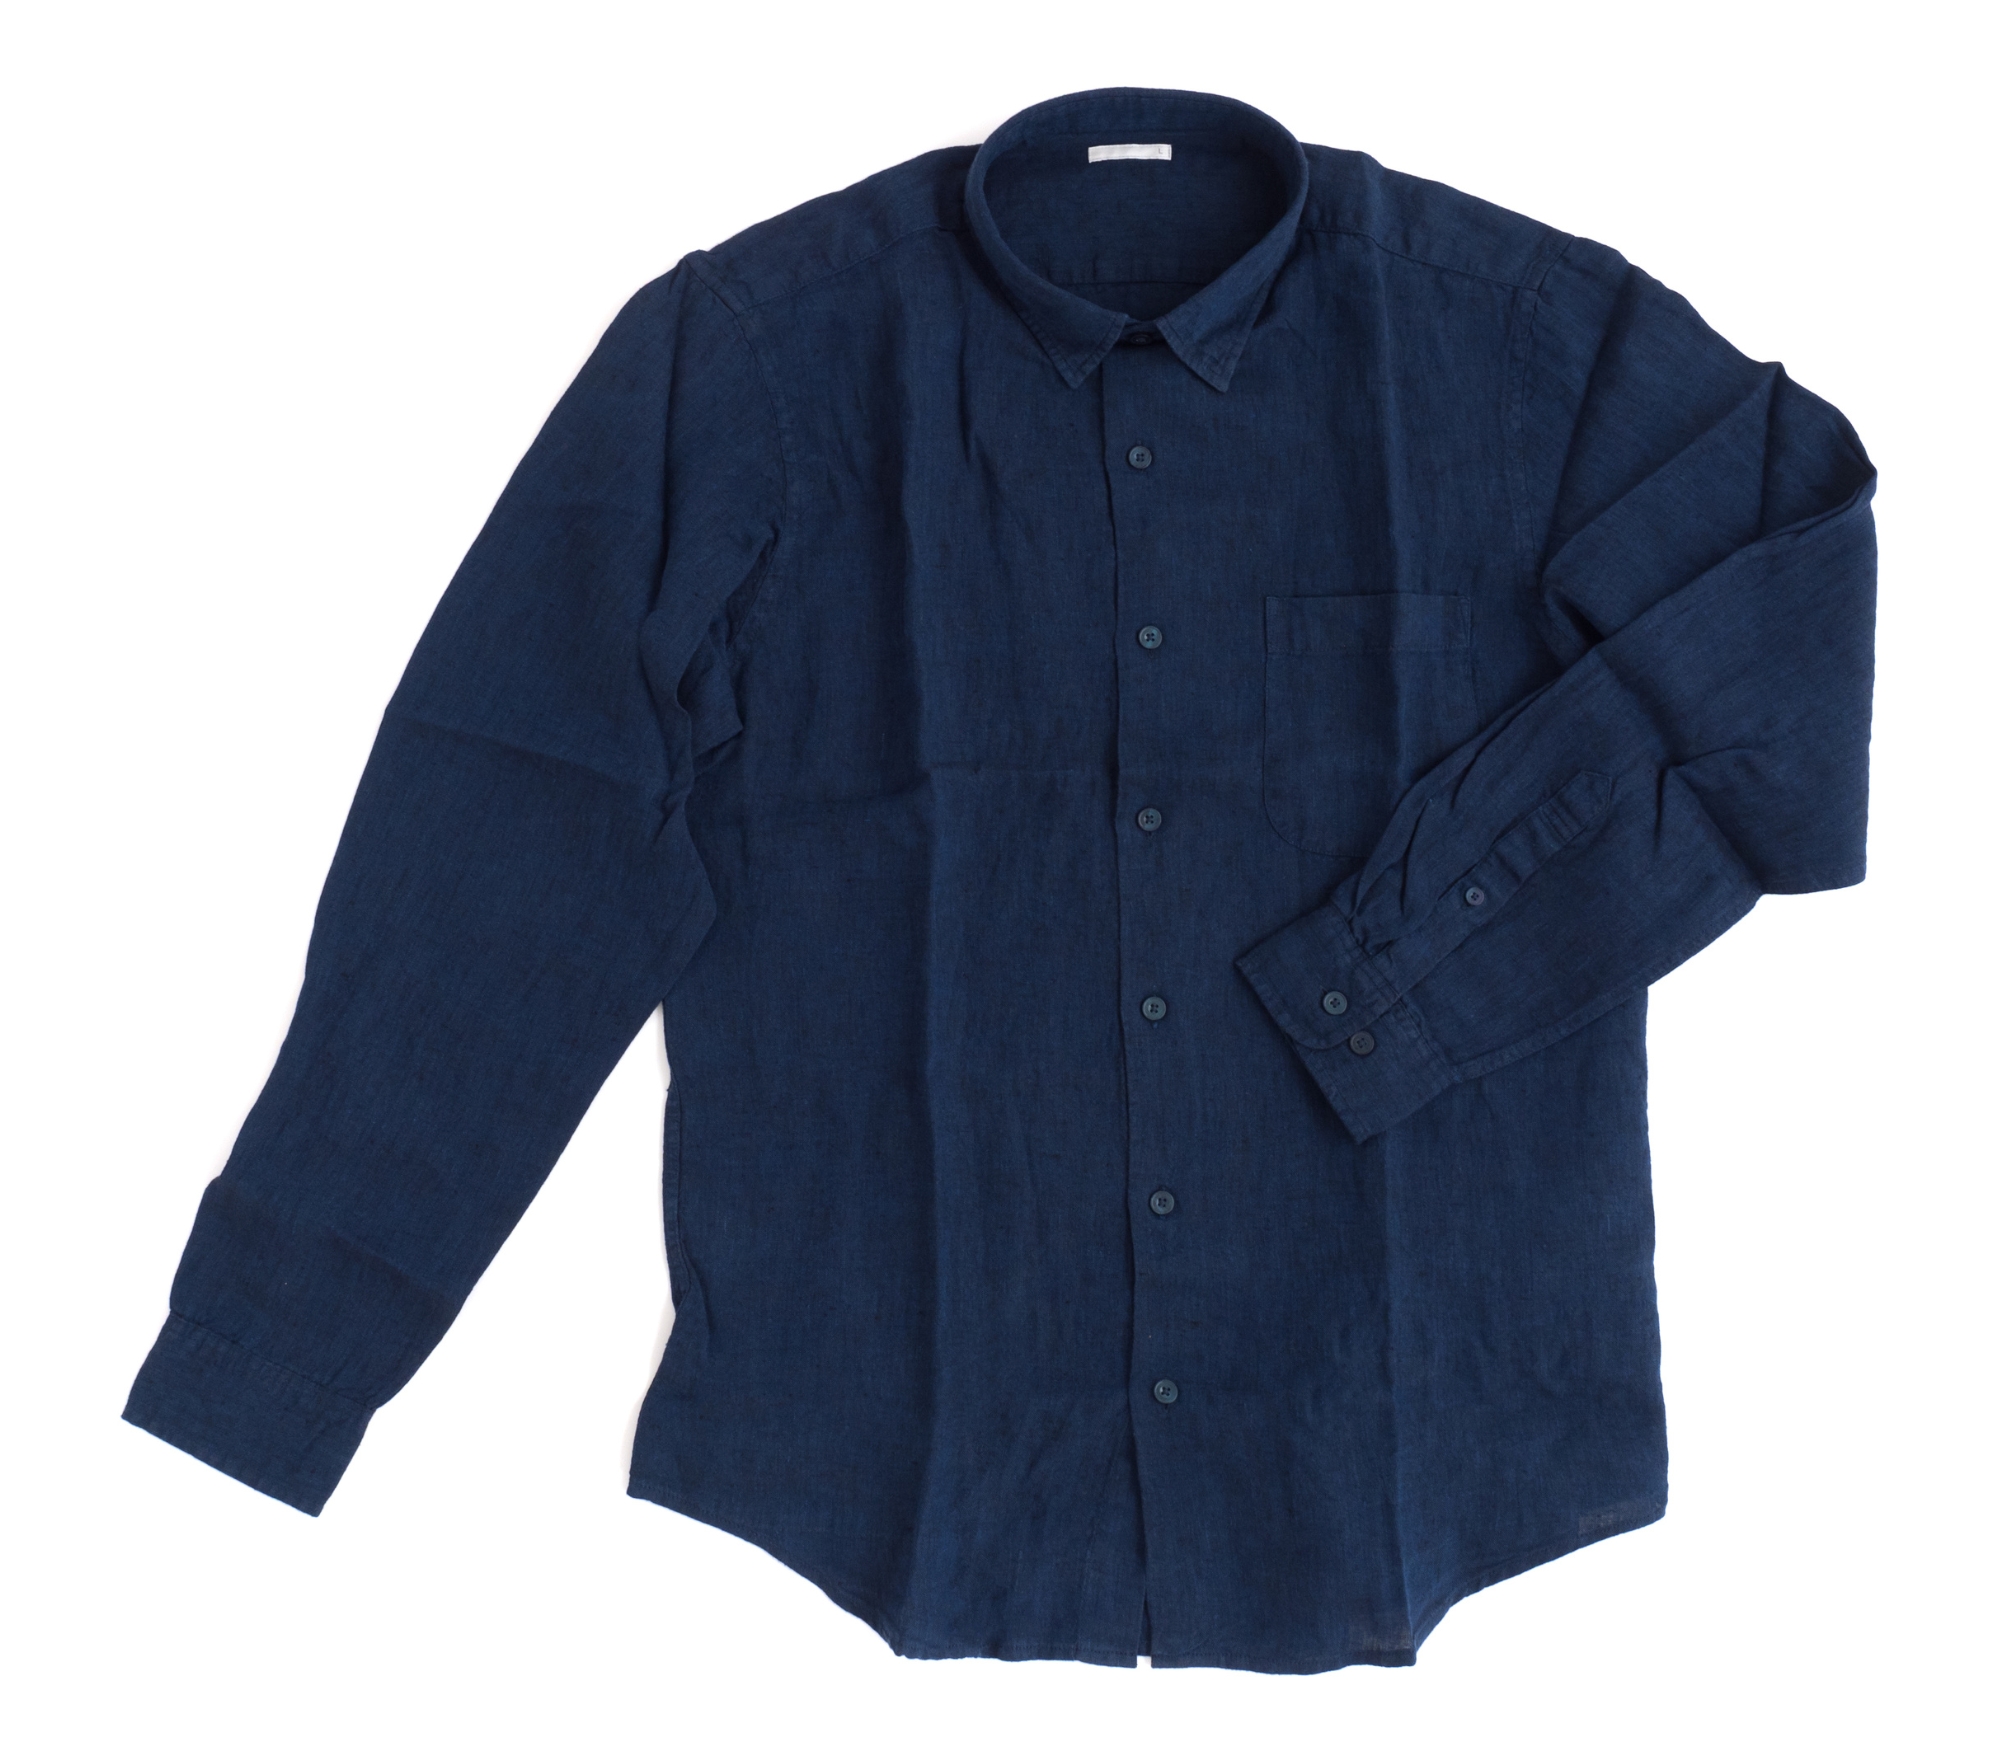 5 Reasons Why You Should Buy Alfani Men’s Button Front Shirt - Tagsweekly